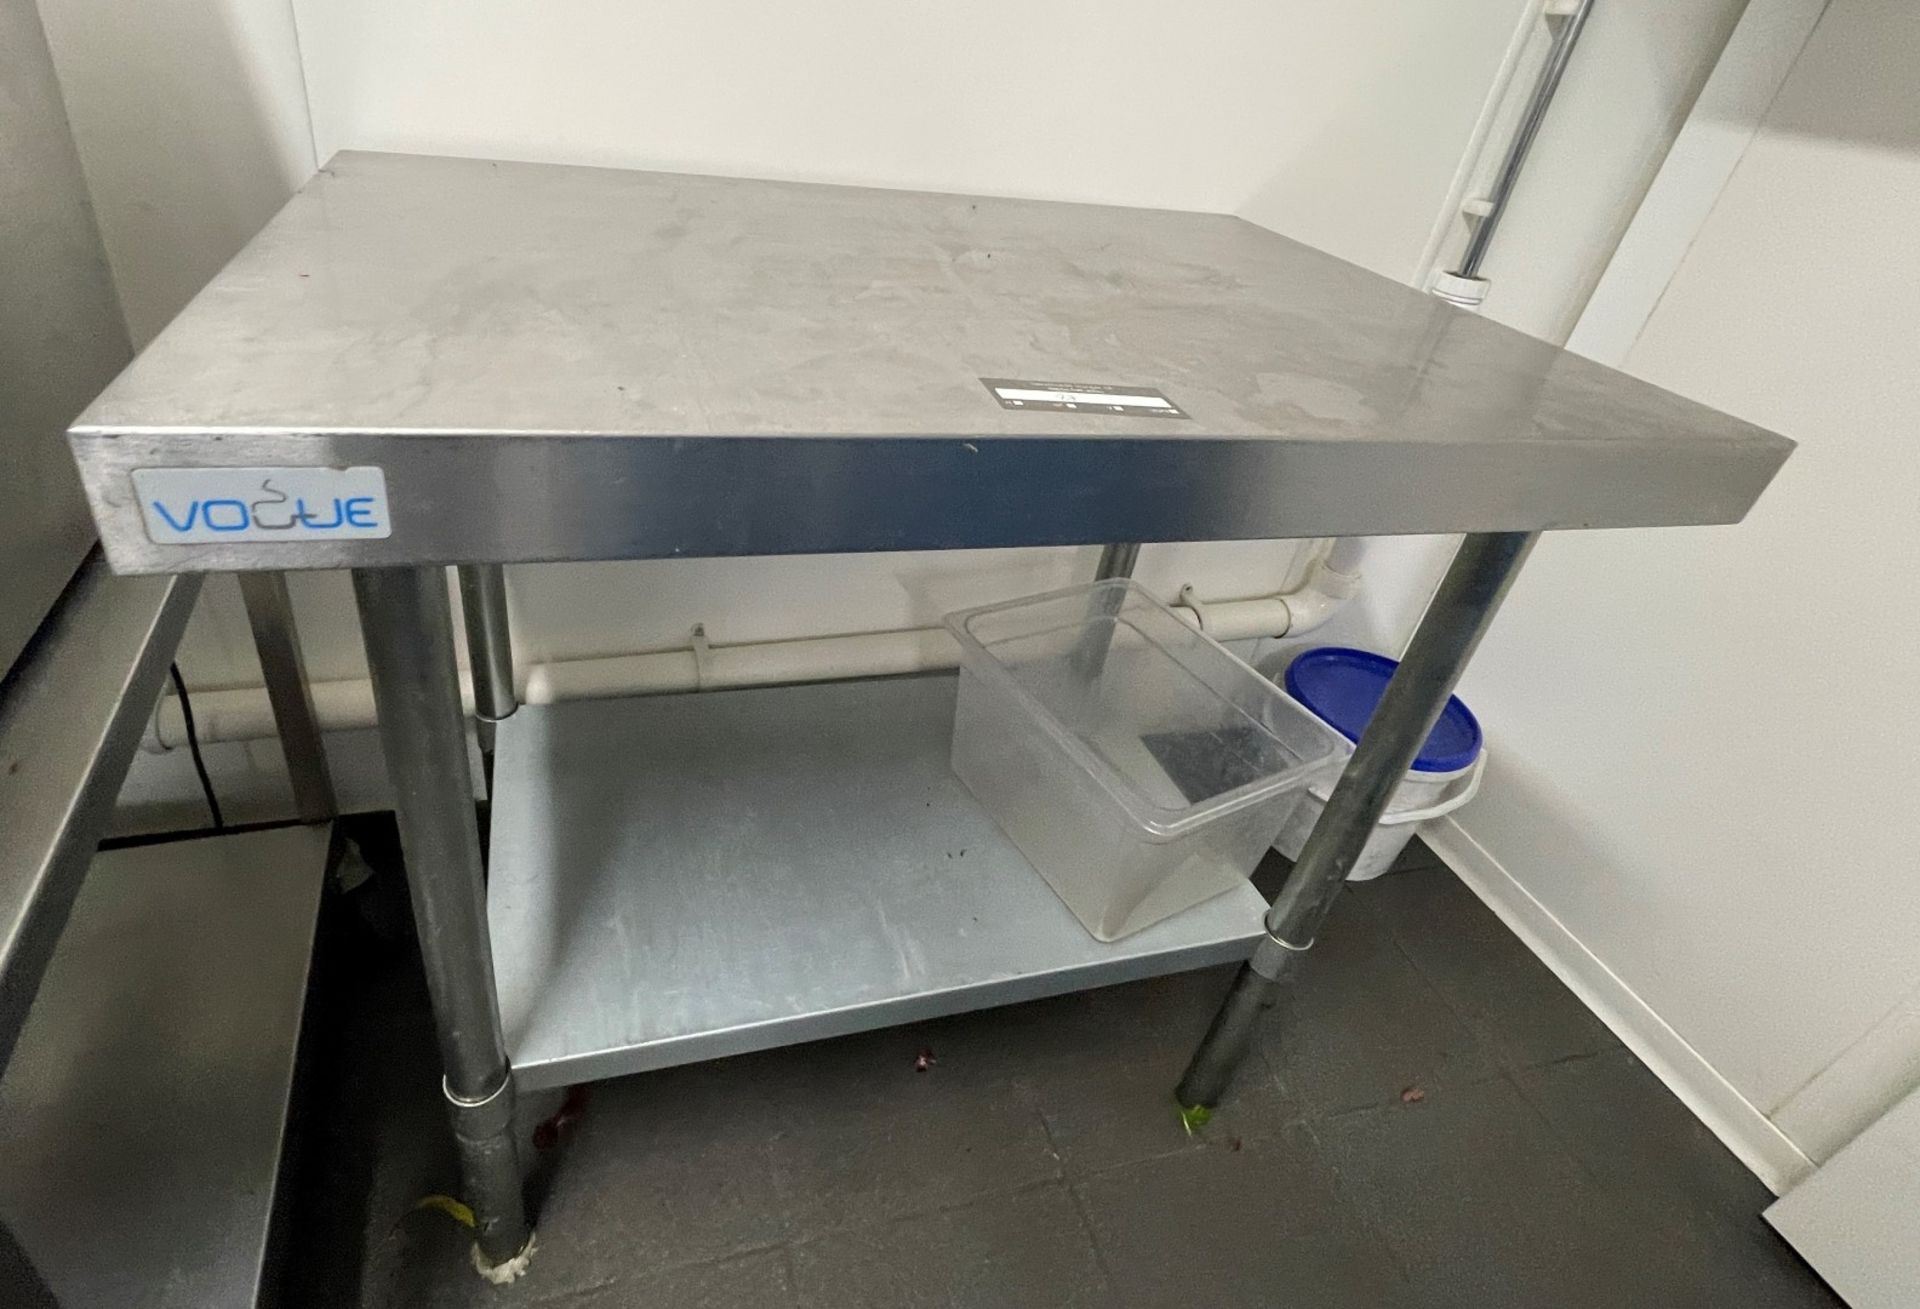 1 x Vogue Stainless Steel Prep Table - Size: 90x60 cms - Image 2 of 3